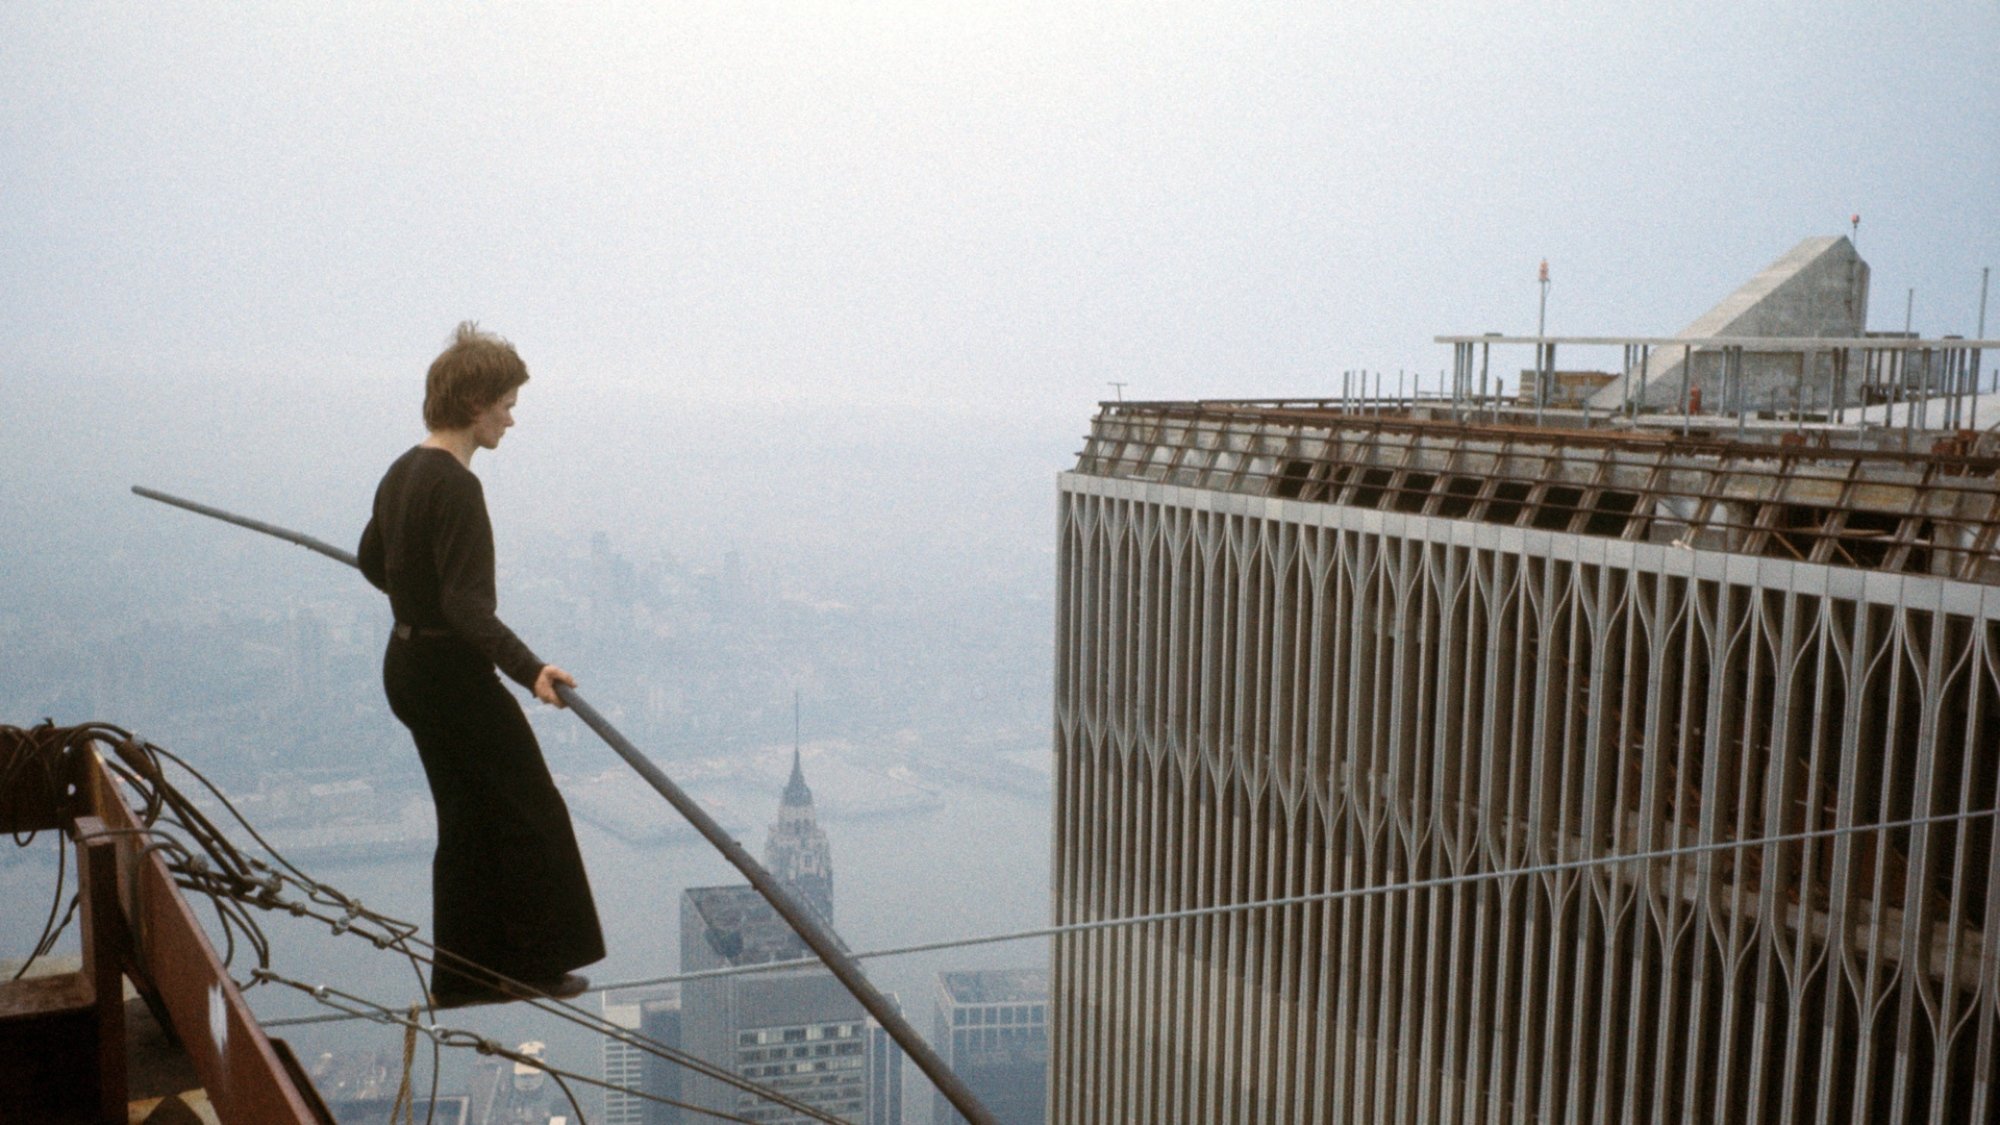 A scene from "Man on Wire."